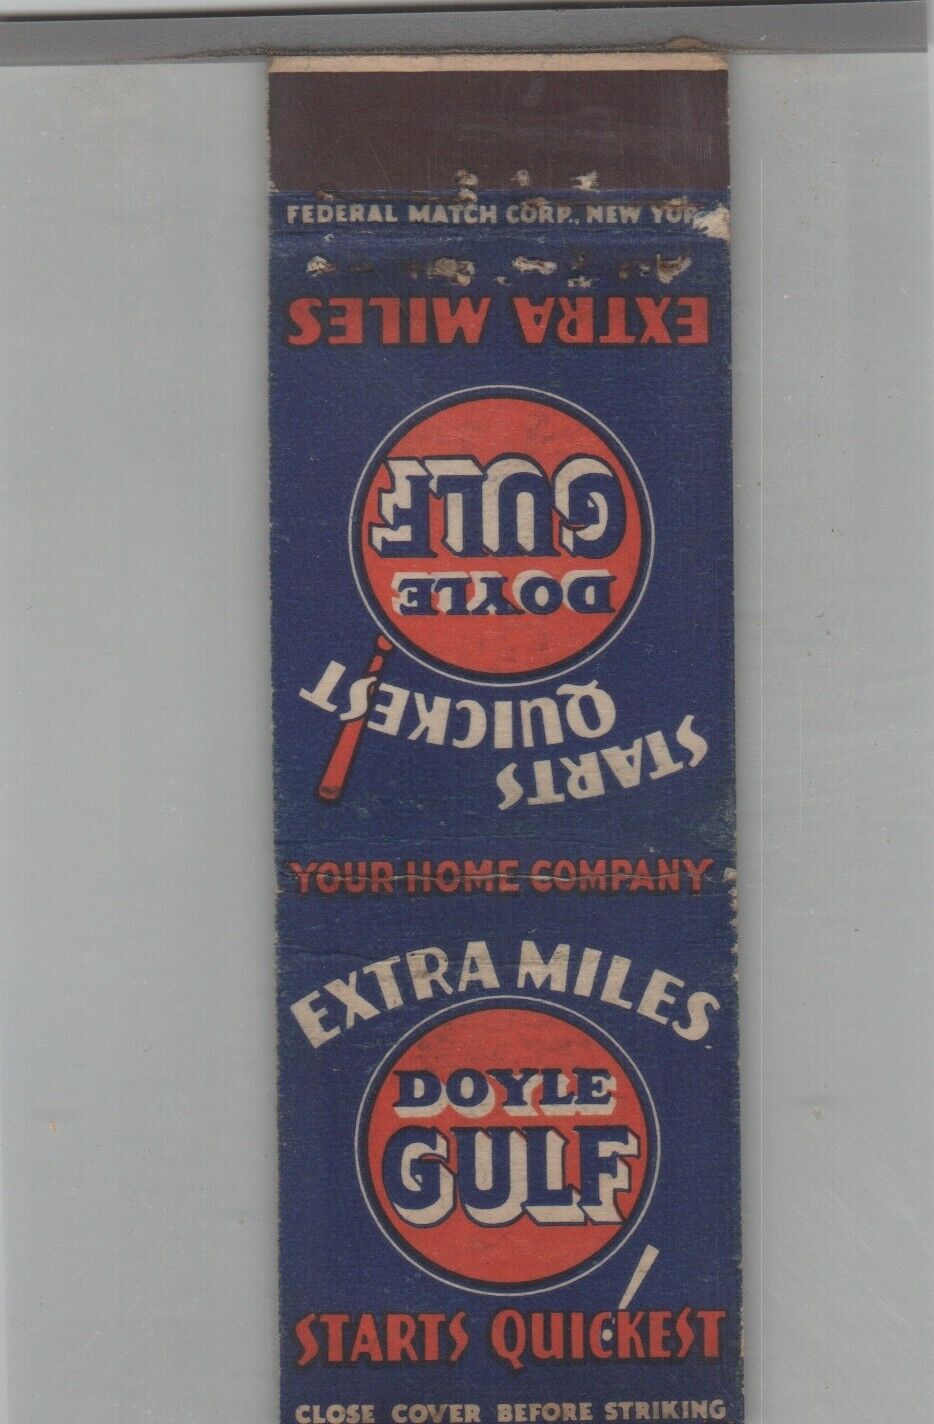 Matchbook Cover Federal Match Co Doyle Gulf Extra Miles Starts Quickest